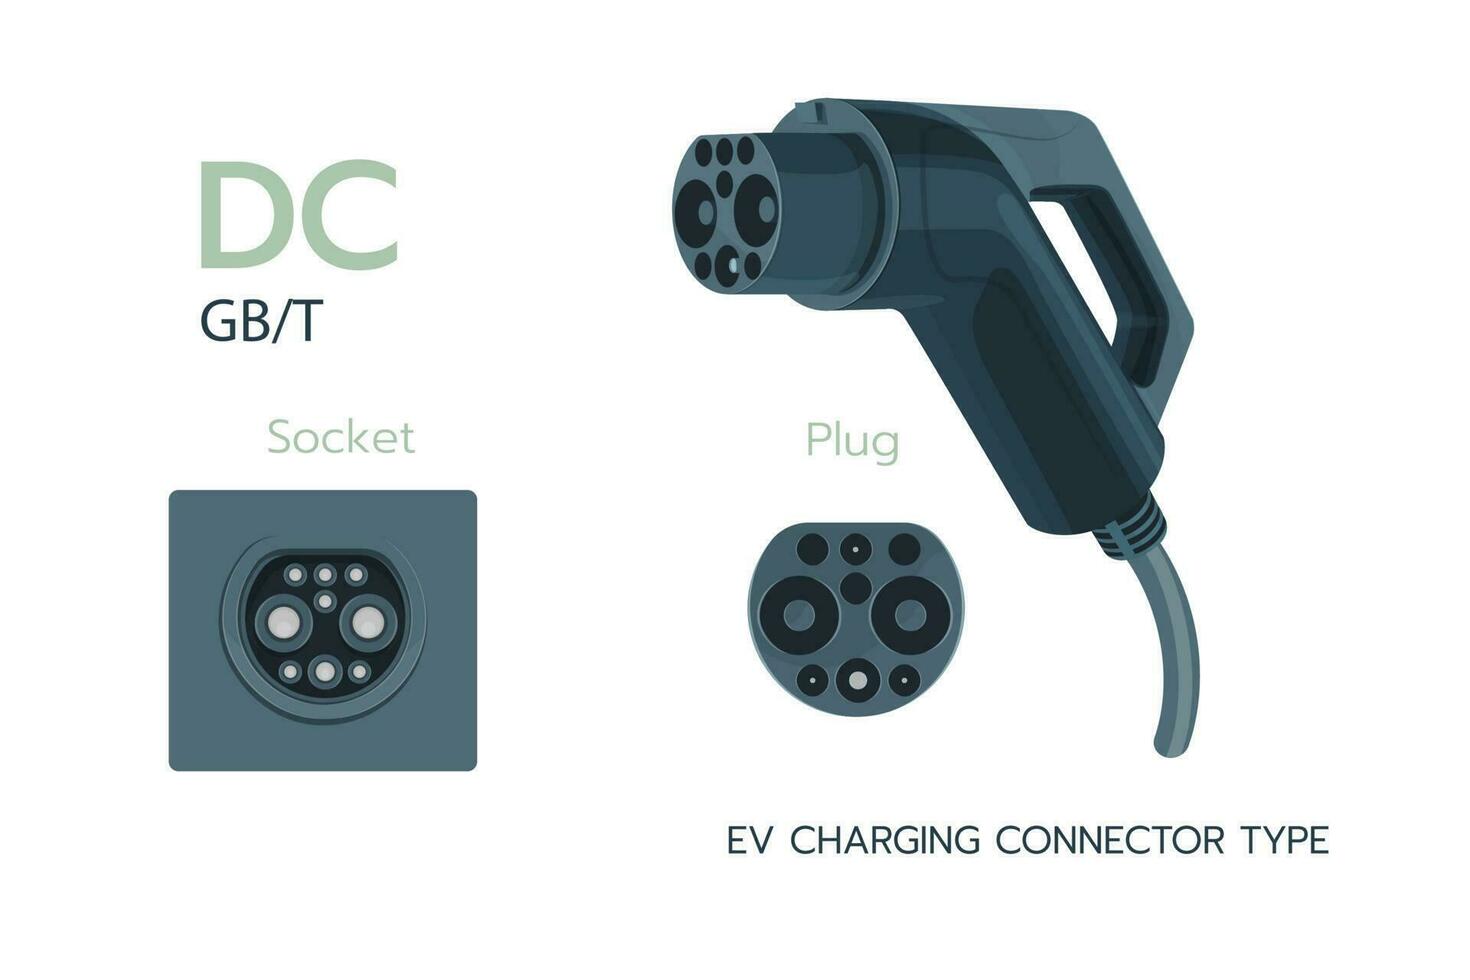 GBT, DC standard charging connector electric car. Electric battery vehicle inlet charger detail. EV cable for DC power. GBT charger plugs and charging sockets types in China. vector